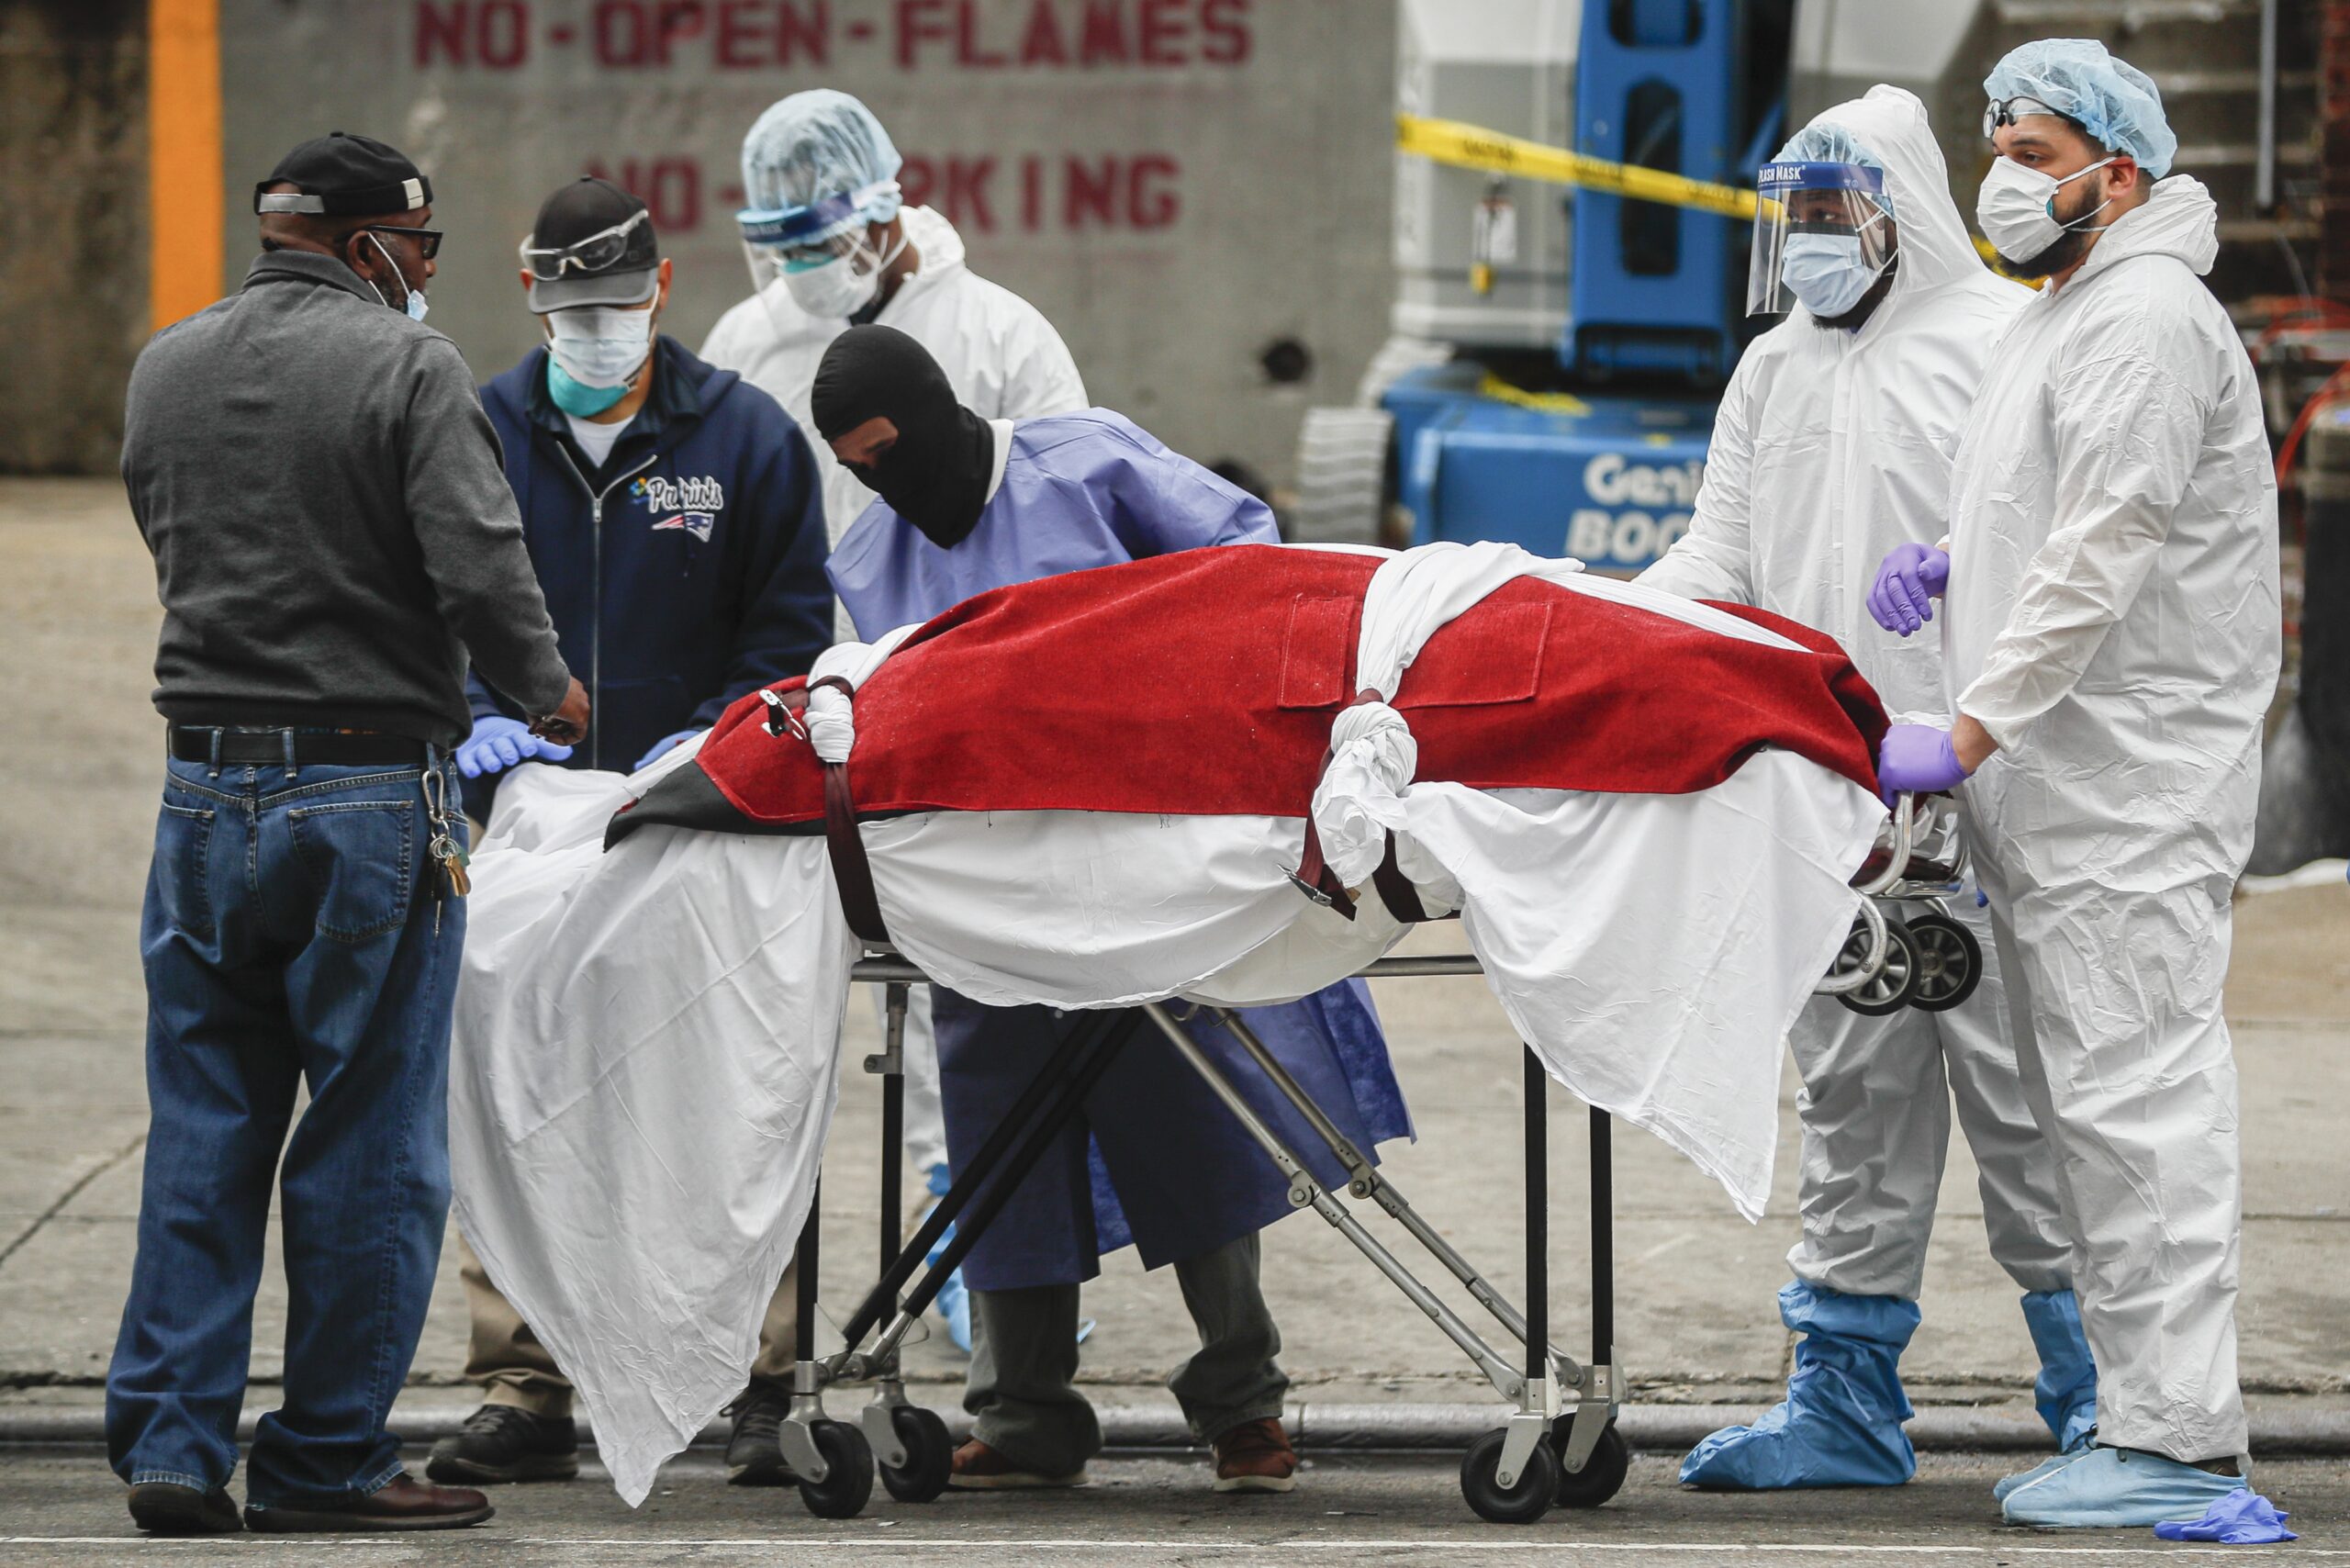 A body wrapped in plastic is handled by medical workers in Brooklyn